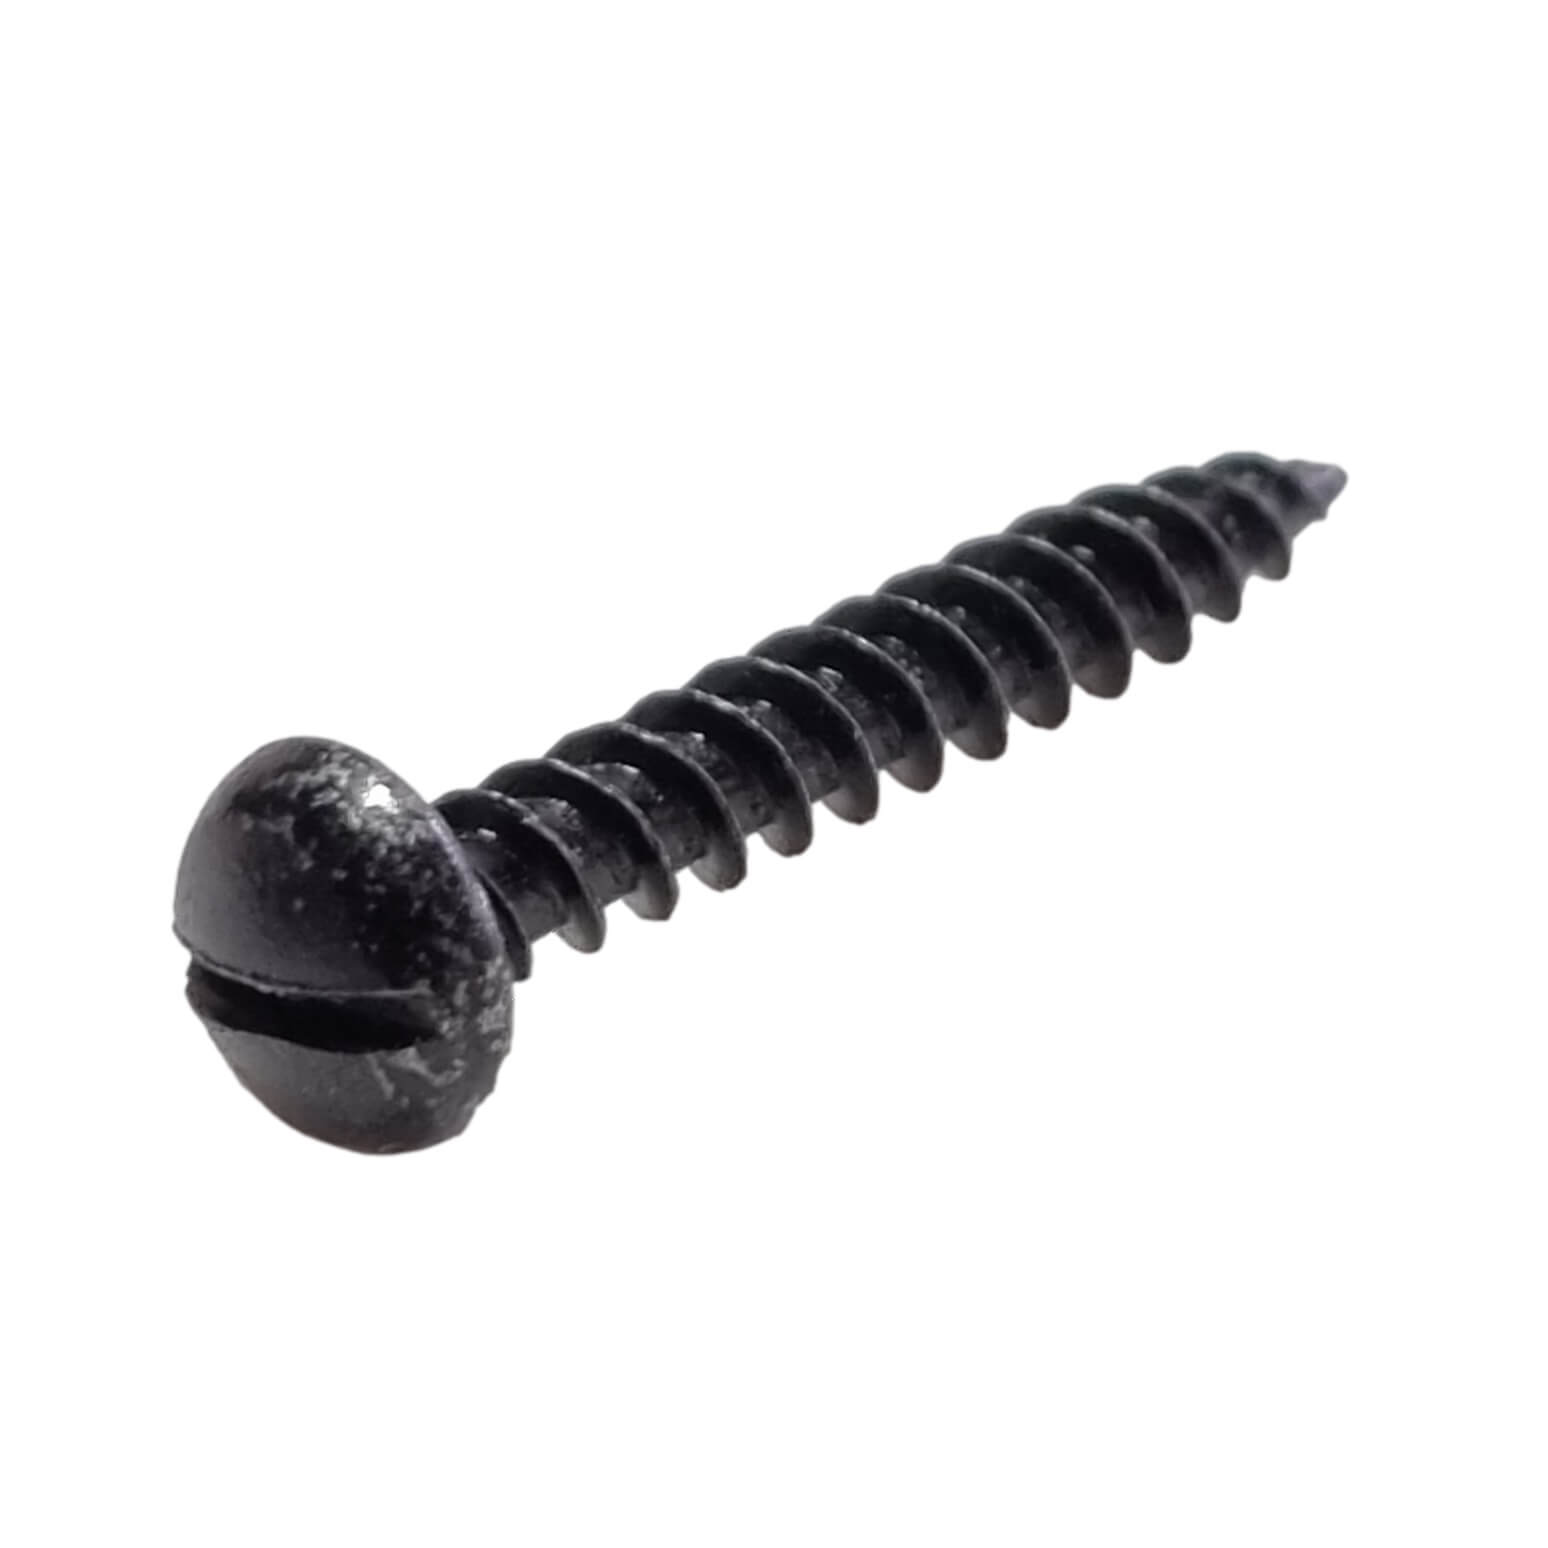 20 X Slotted Black Japanned Round Head Wood Screws 8g X 1” Business